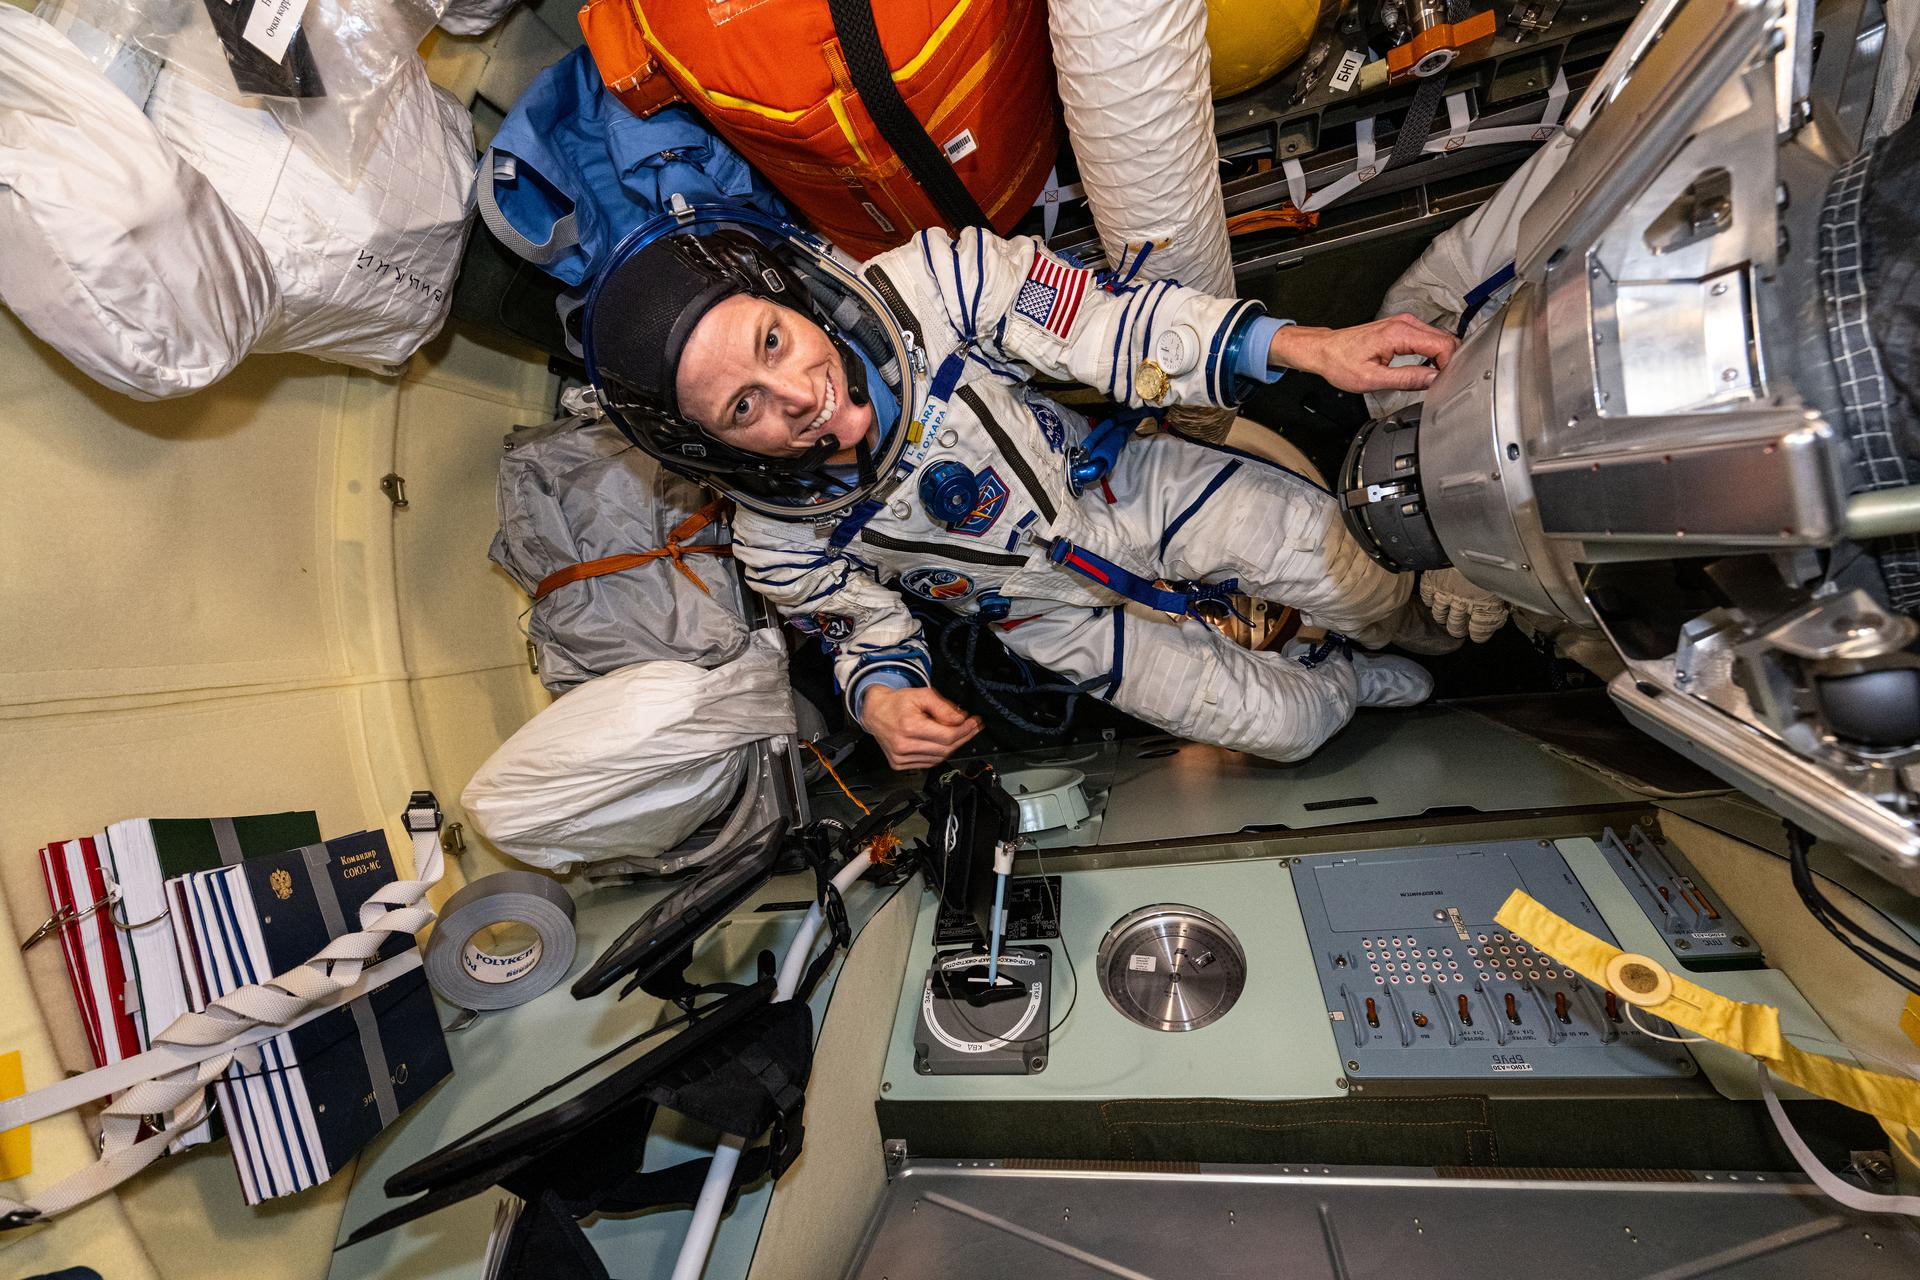 a woman in a white space suit, but no helmet, floats in a space station module surrounded by equipment. The walls are tan.